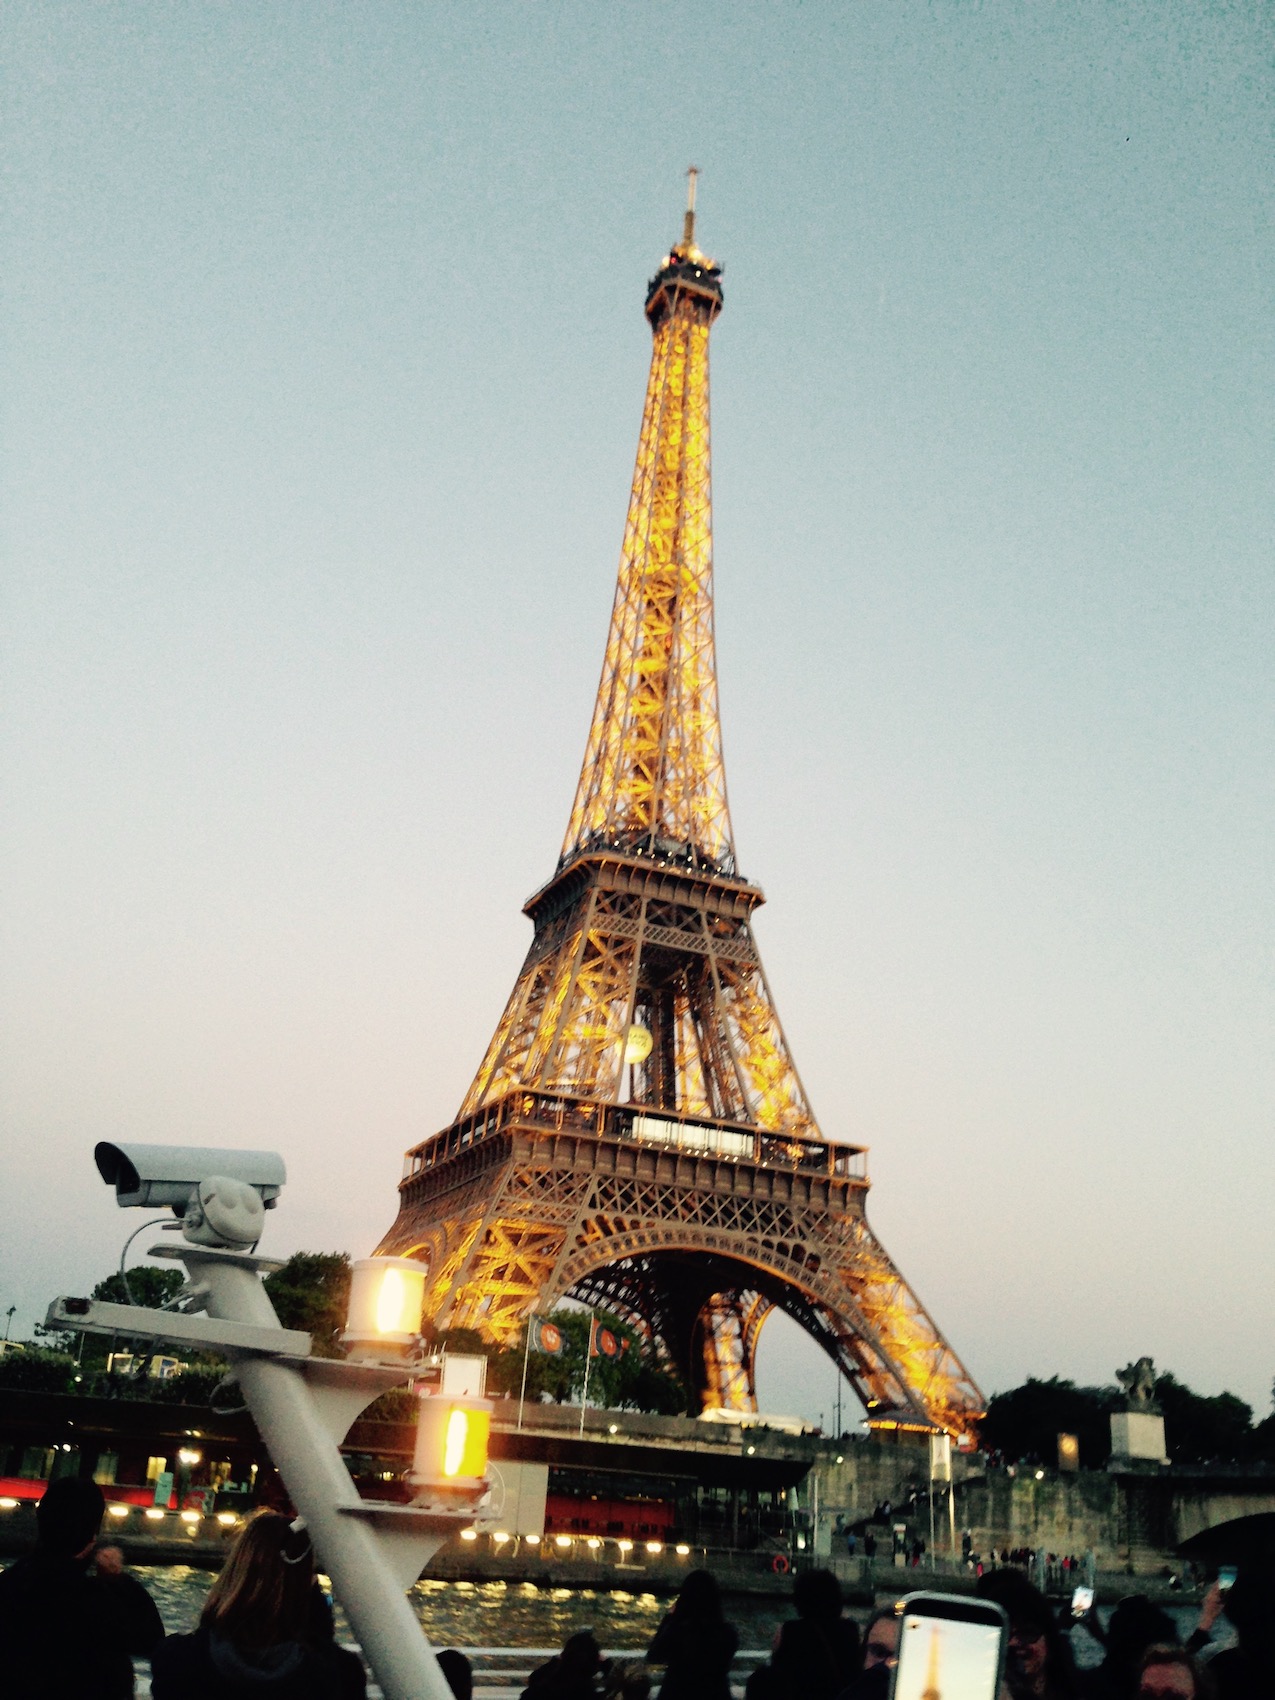 Eiffel Tower, taken from the boat cruise on the River Seine - just approaching sunset.